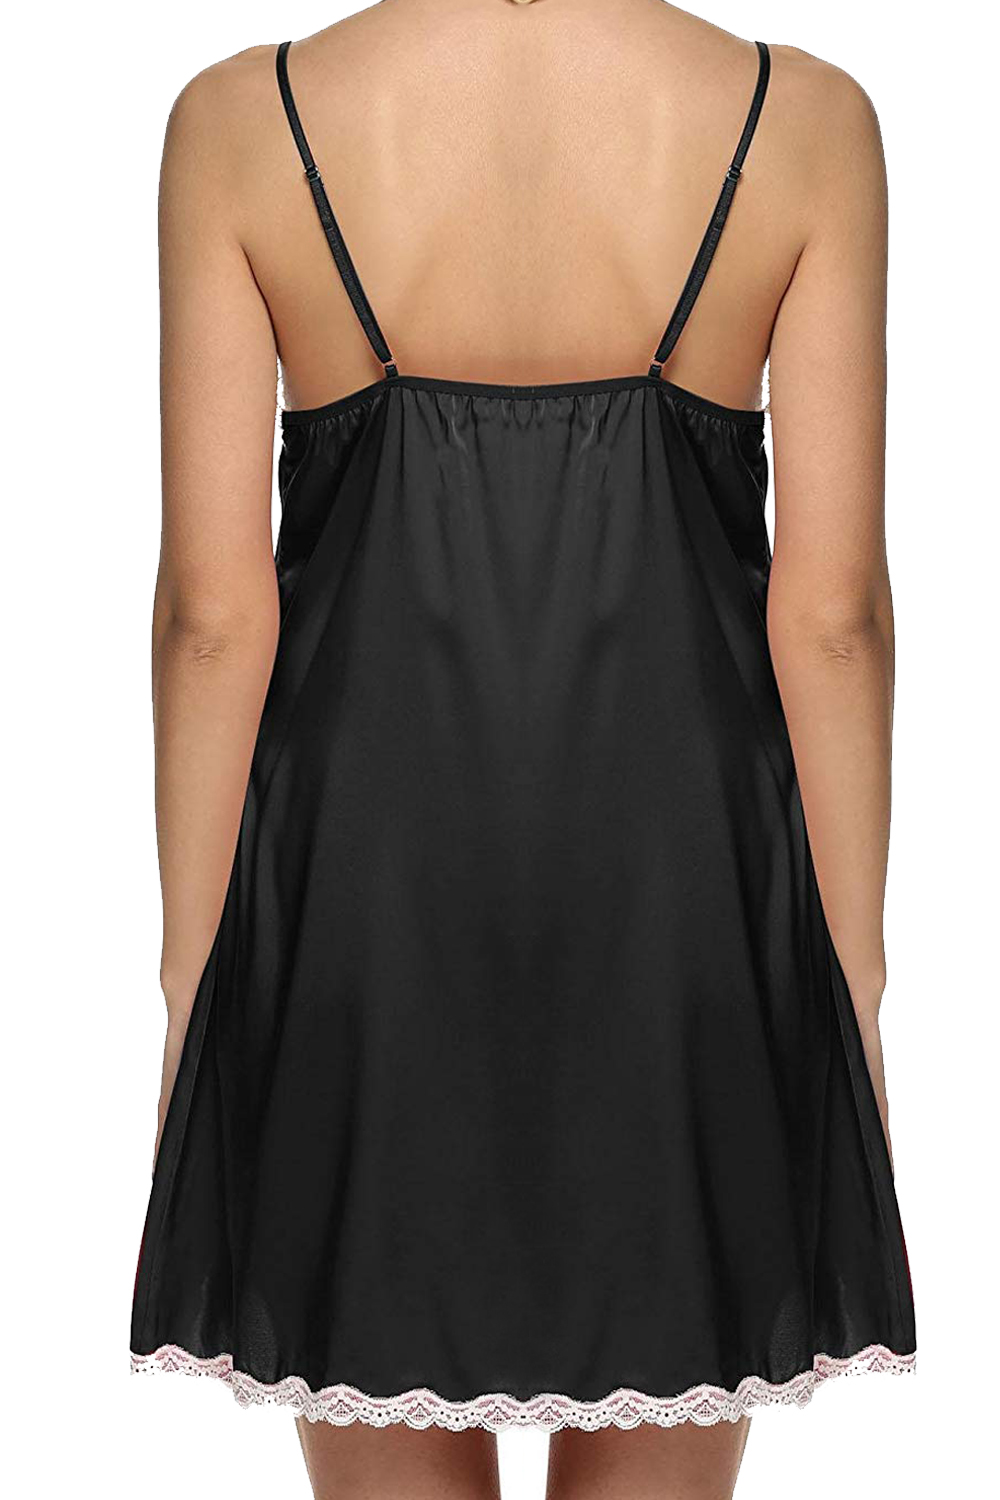 Nightie for women - 10 products